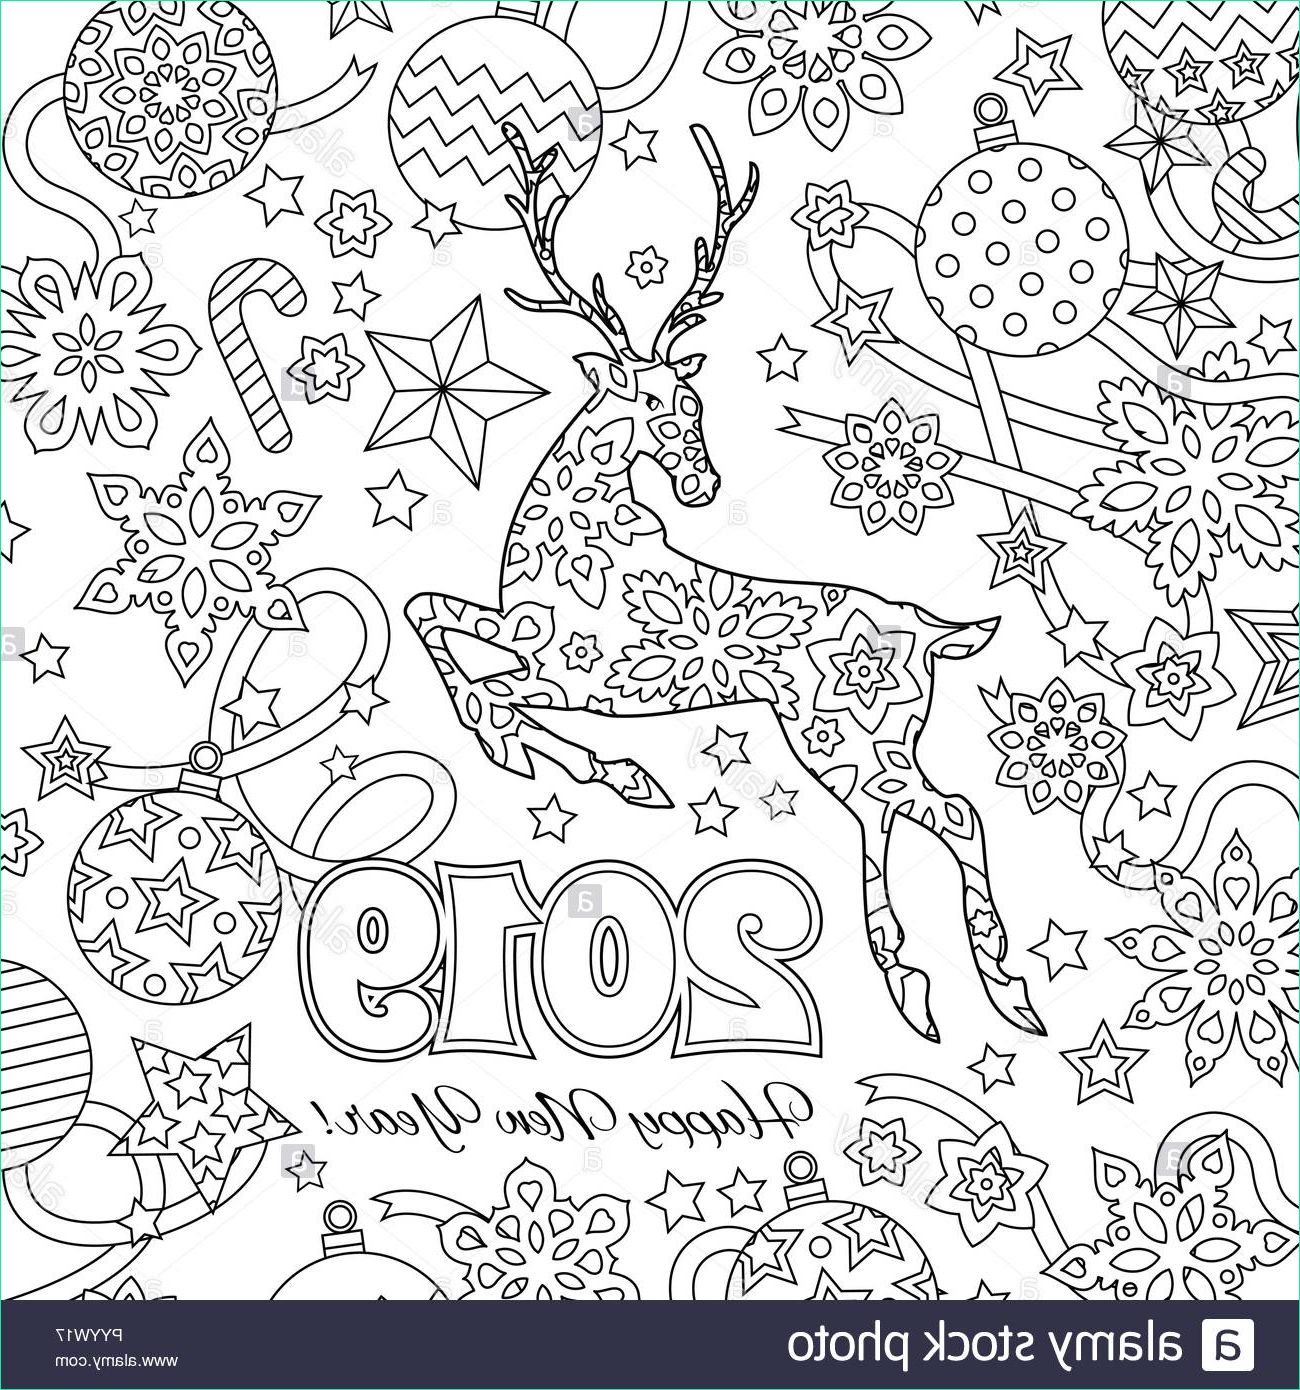 new year congratulation card with numbers 2019 deer and festive objects zentangle inspired style zen colorful graphic image for calendar coloring book image